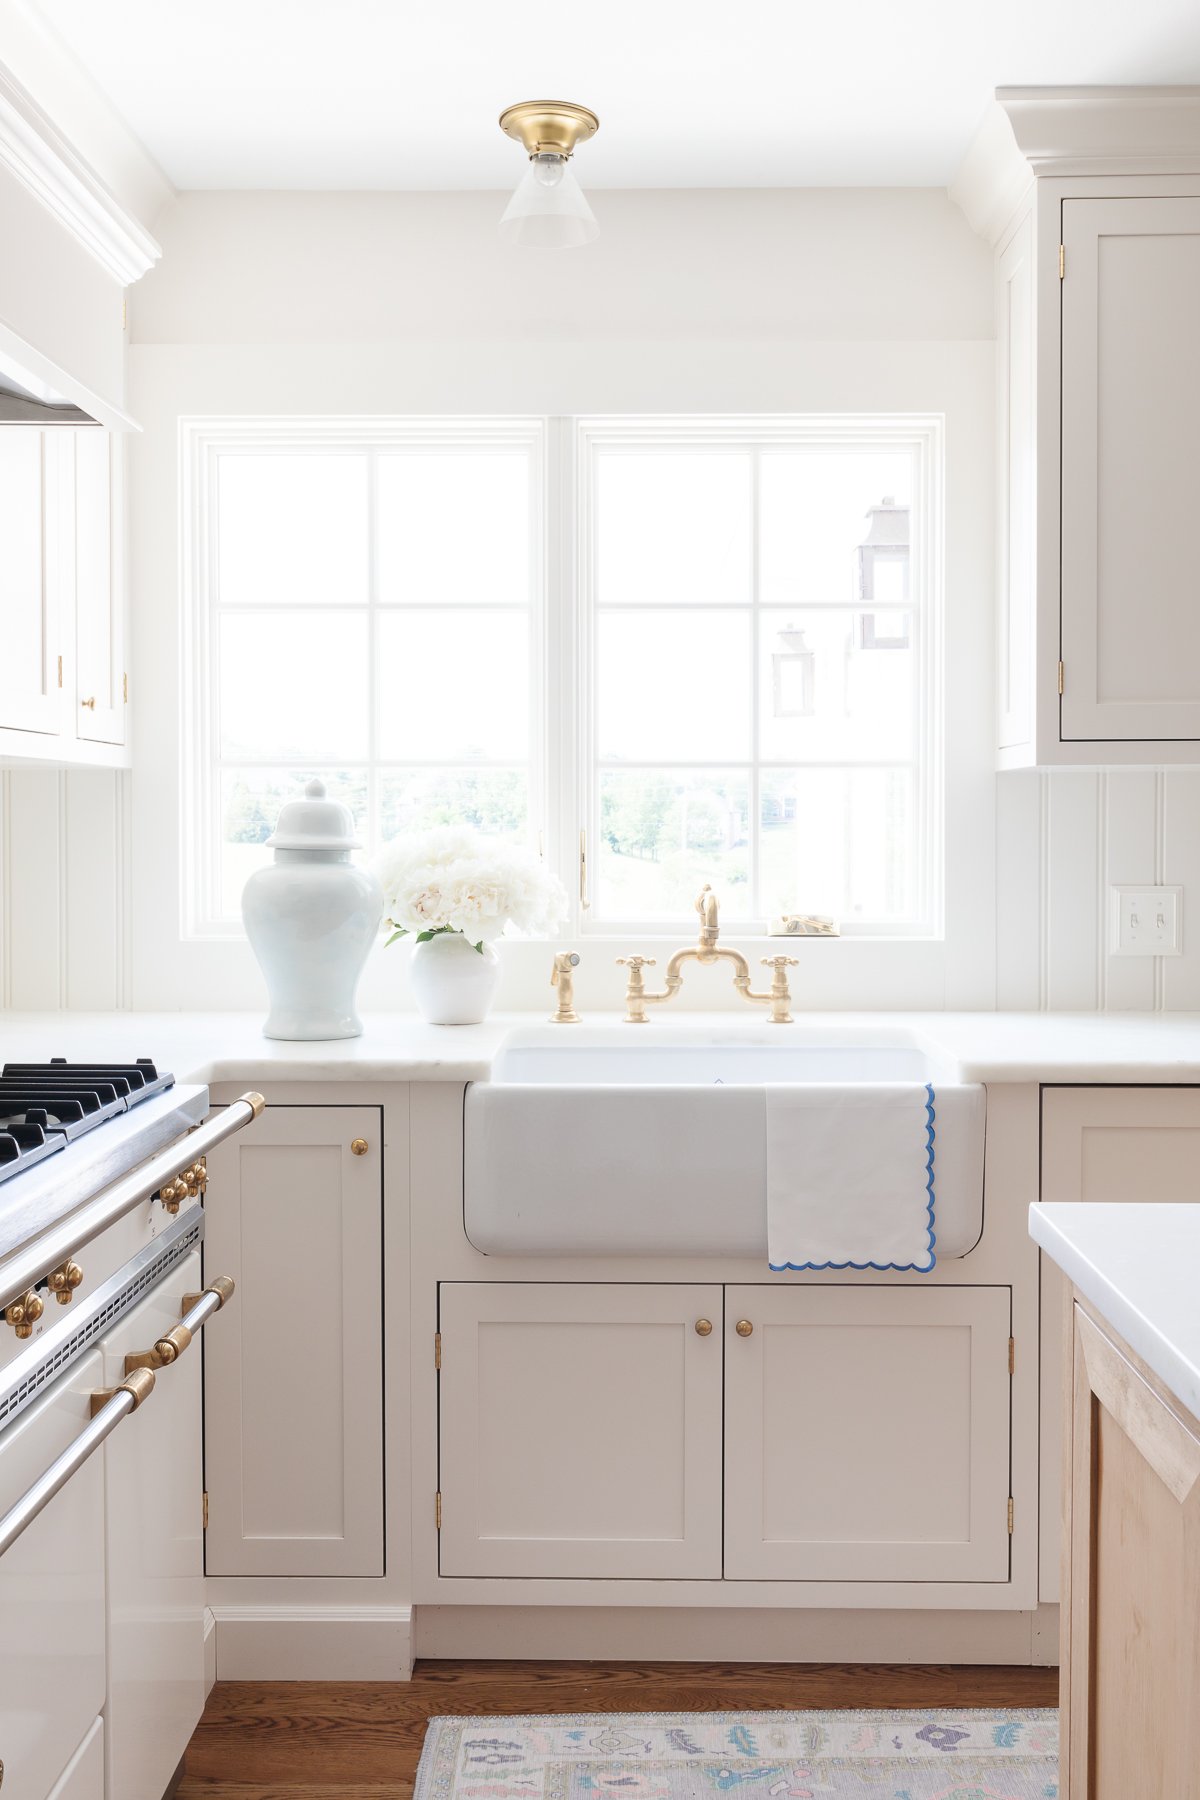 A kitchen with white cabinets and a white sink, featuring under sink storage.